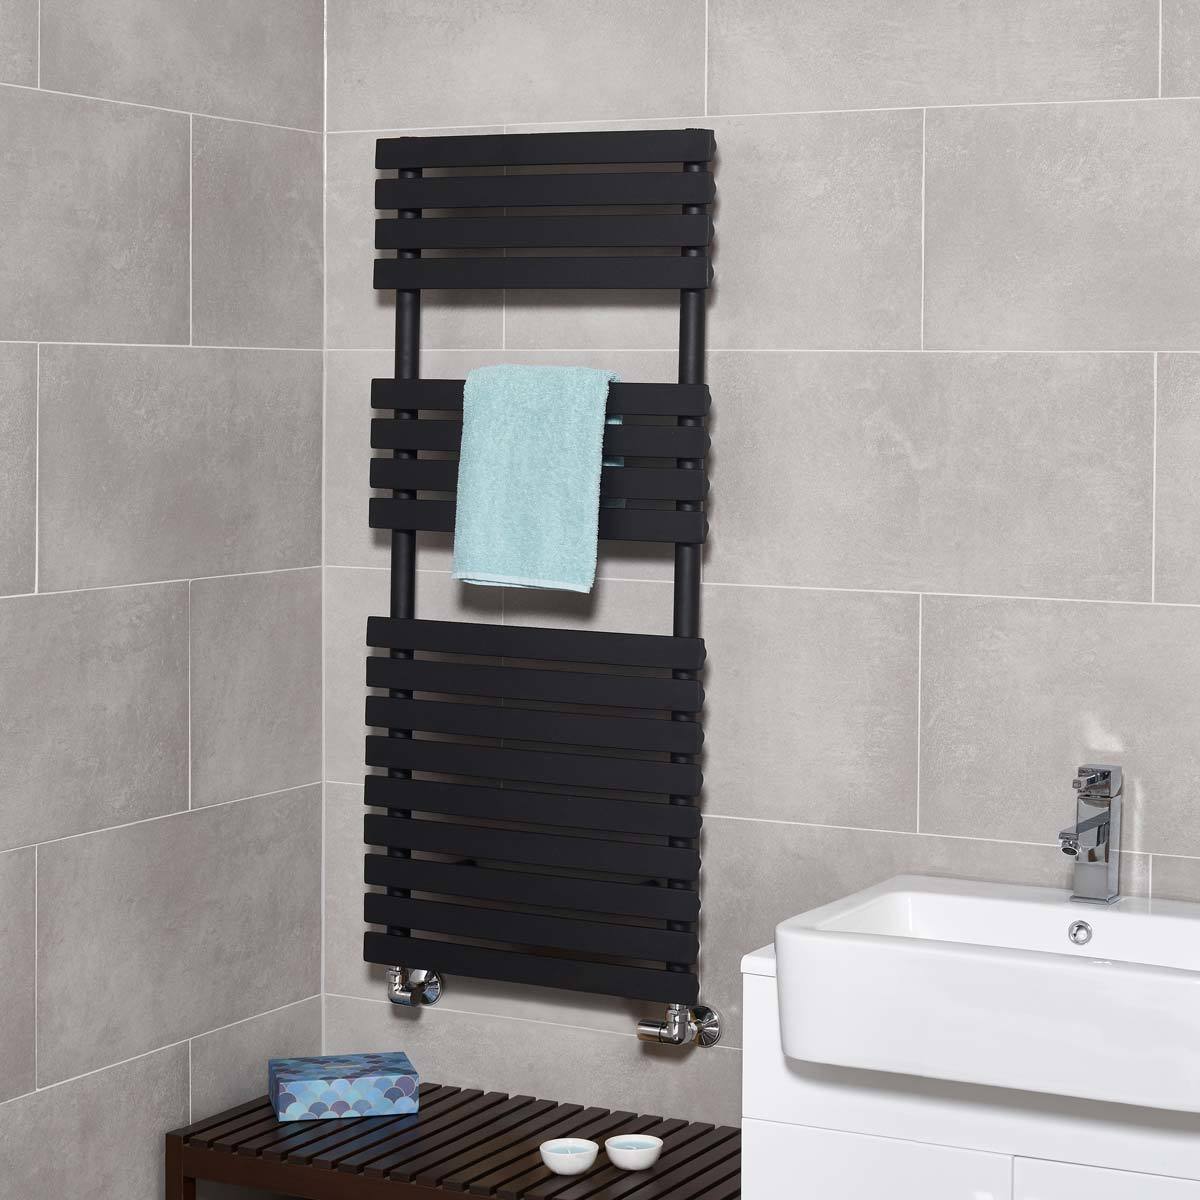 Lifestyle image of radiator in bathroom setting with towel hanging